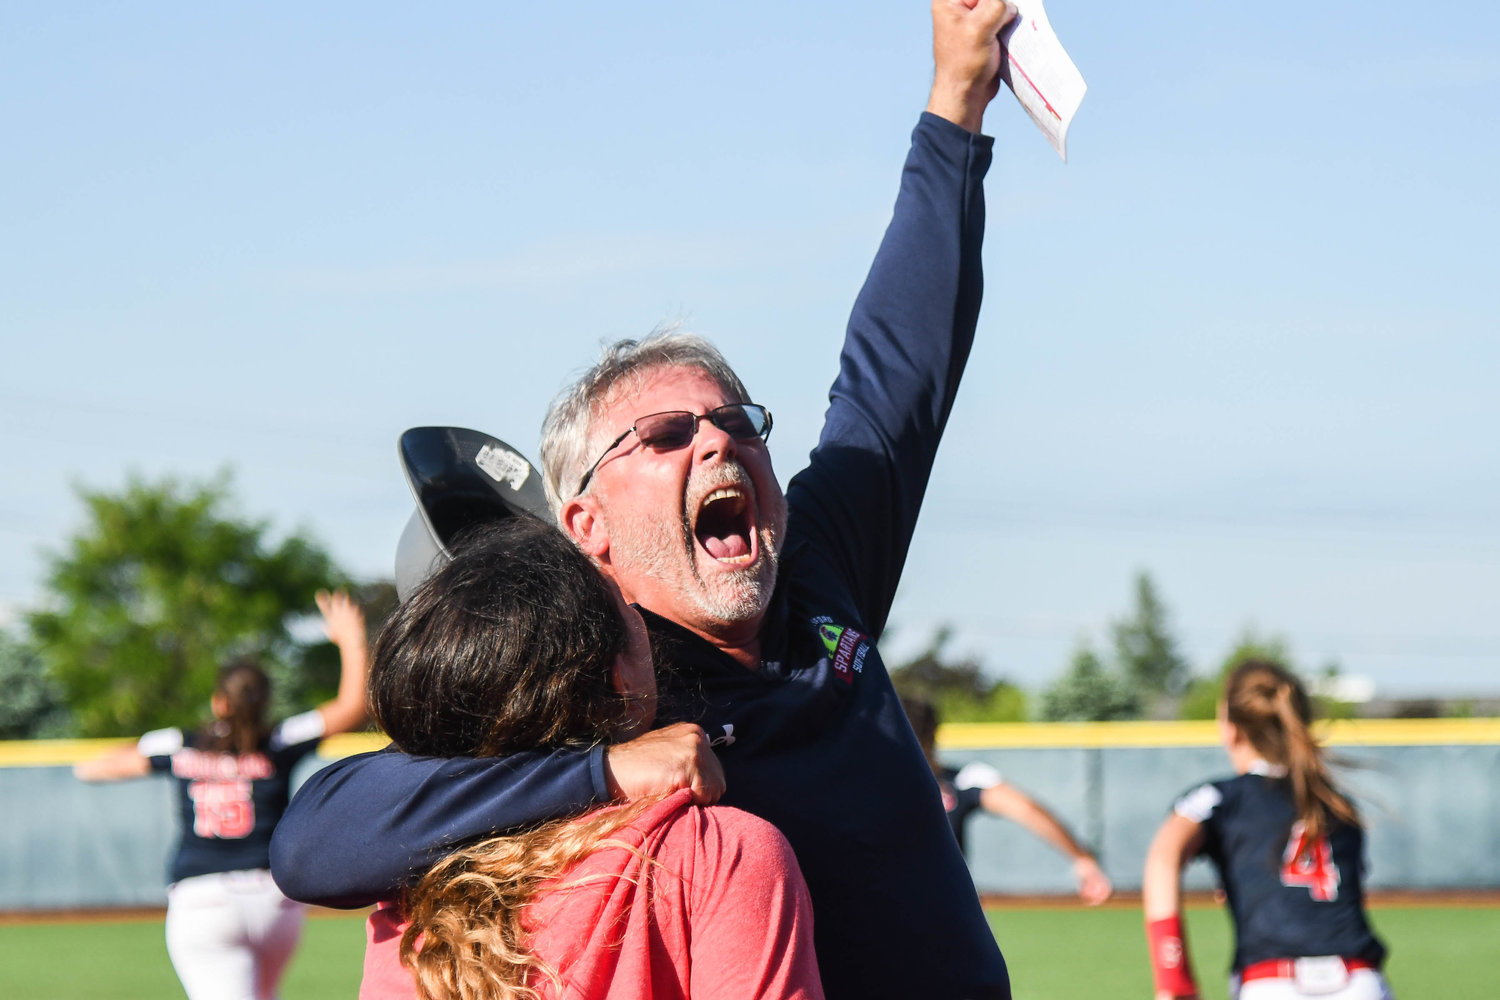 New Hartford head softball coach Dan Stalteri celebrates after winning the Section III Class A title 6-3 over Auburn on Thursday at Onondaga Community College. It is the first full season for Stalteri at the helm, after his first year was wiped out by COVID-19 and last season was only limited games.